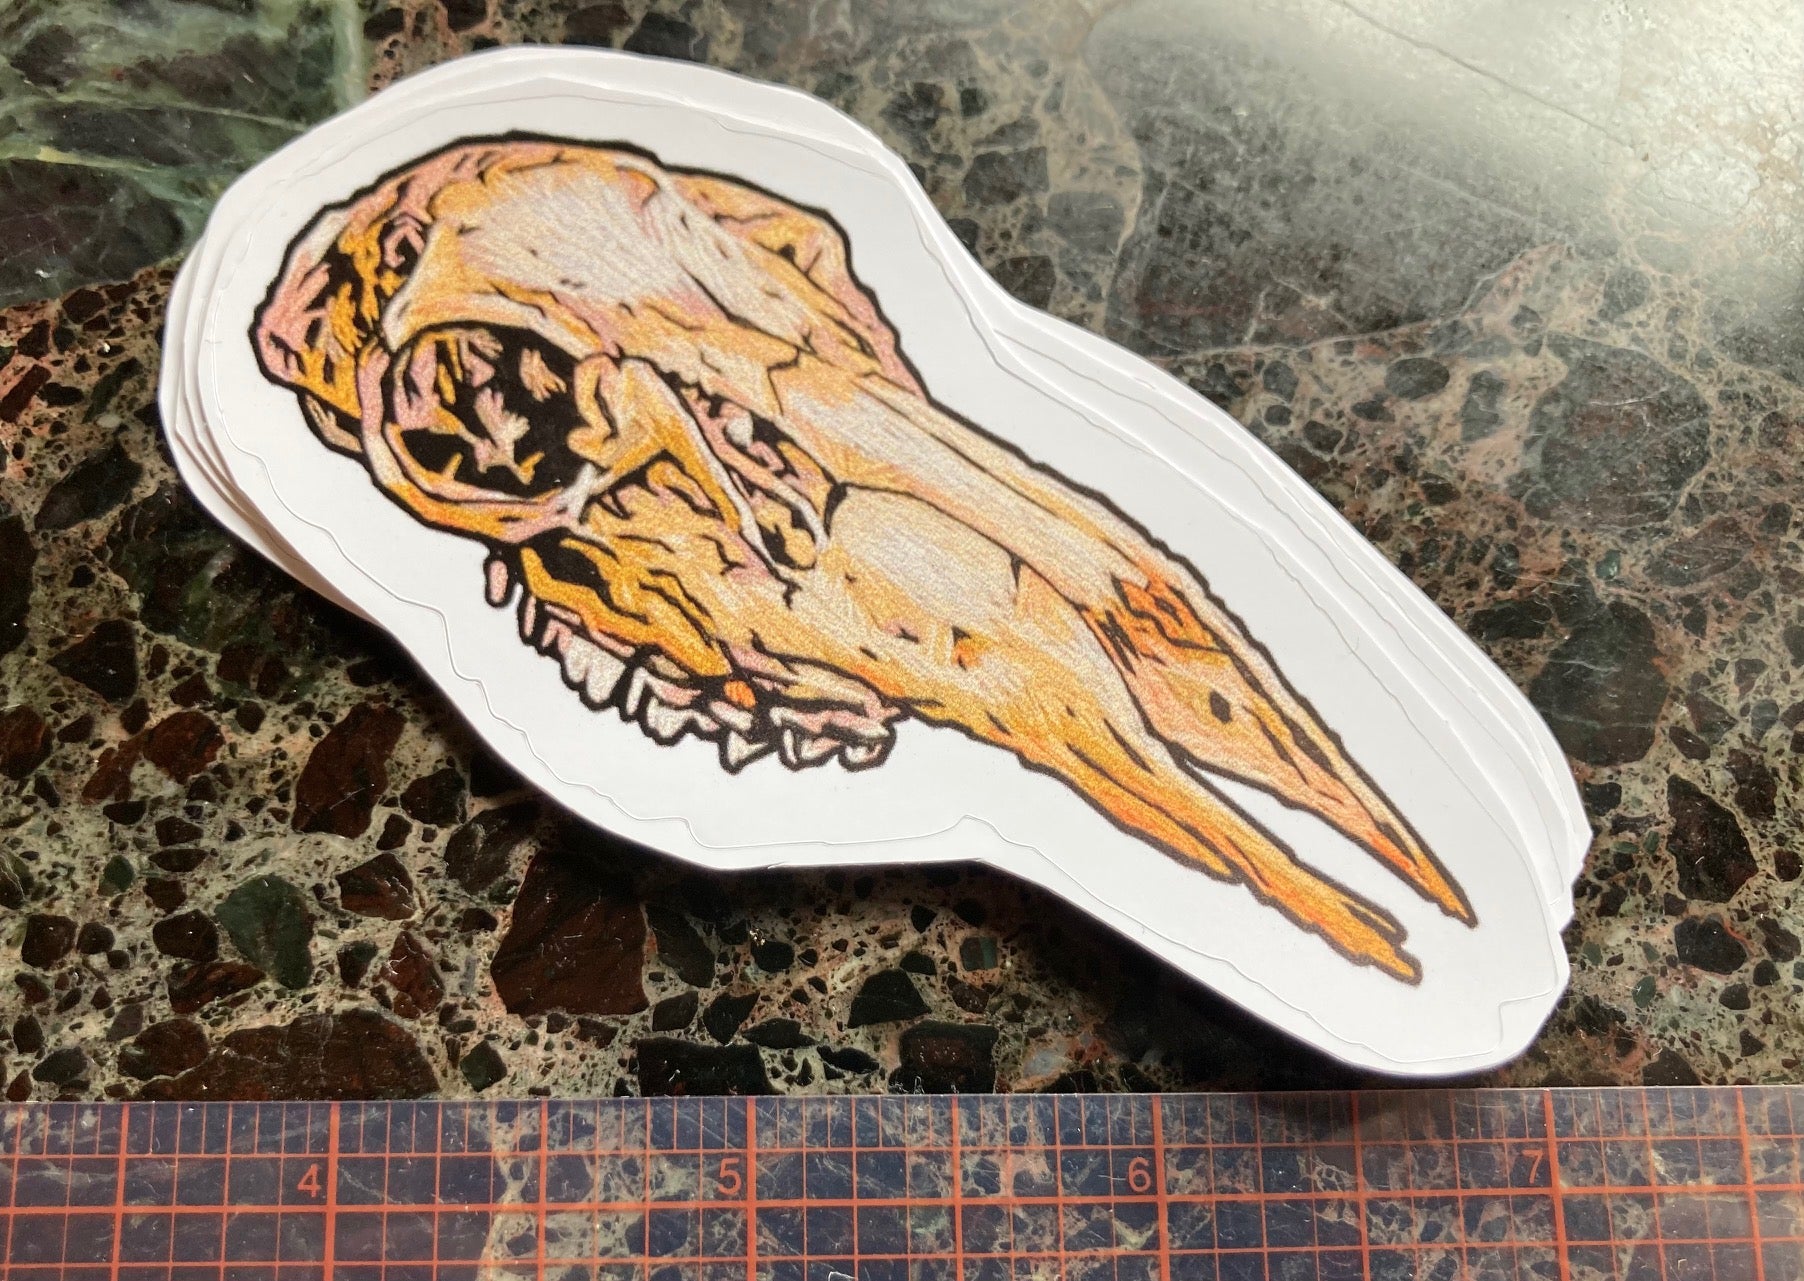 a sticker of an embroidered deer skull with no lower jaw sits on a dark surface. there is a visible ruler showing it is approximately 4 inches long. 